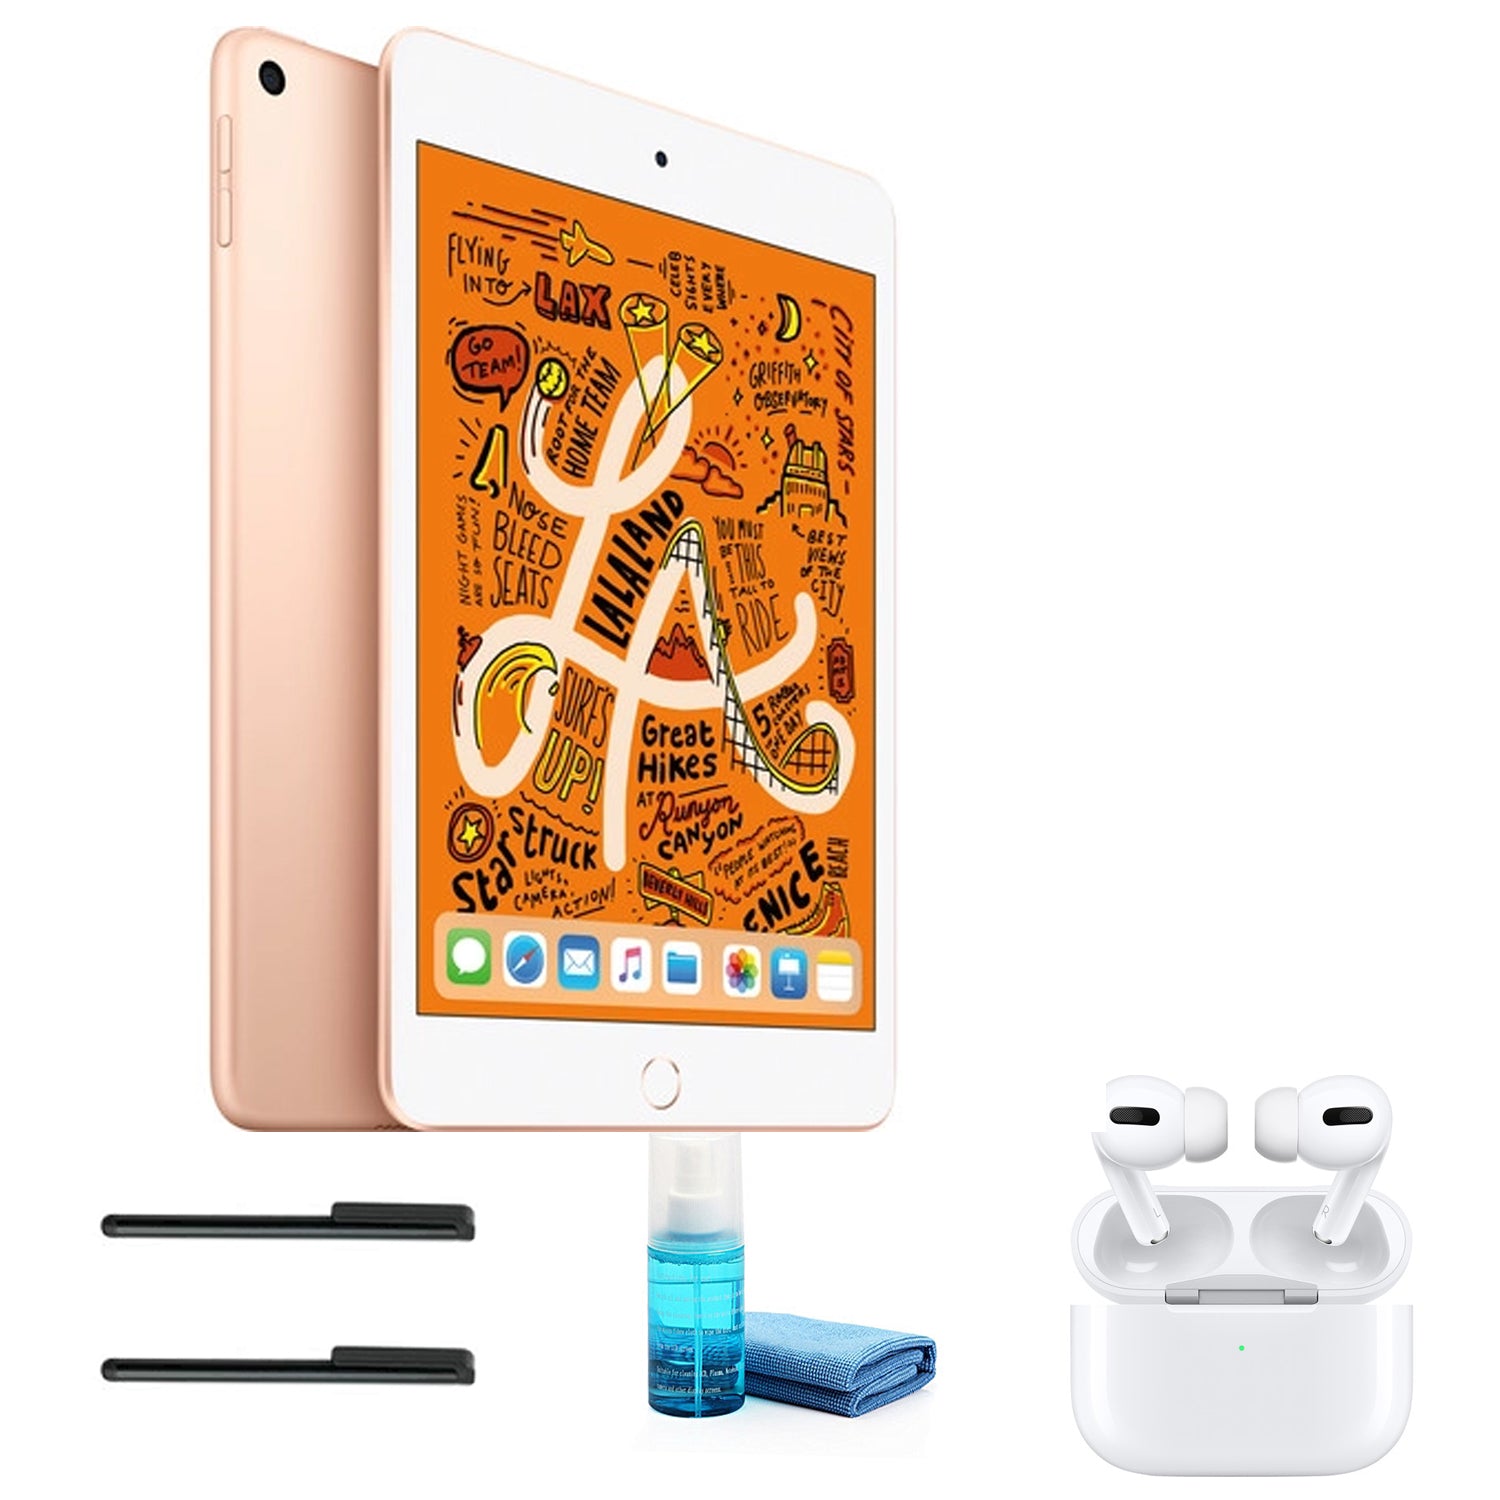 Apple iPad mini 7.9 Inch (64GB, Wi-Fi Only, Gold) with Apple Airpods Pro Bundle